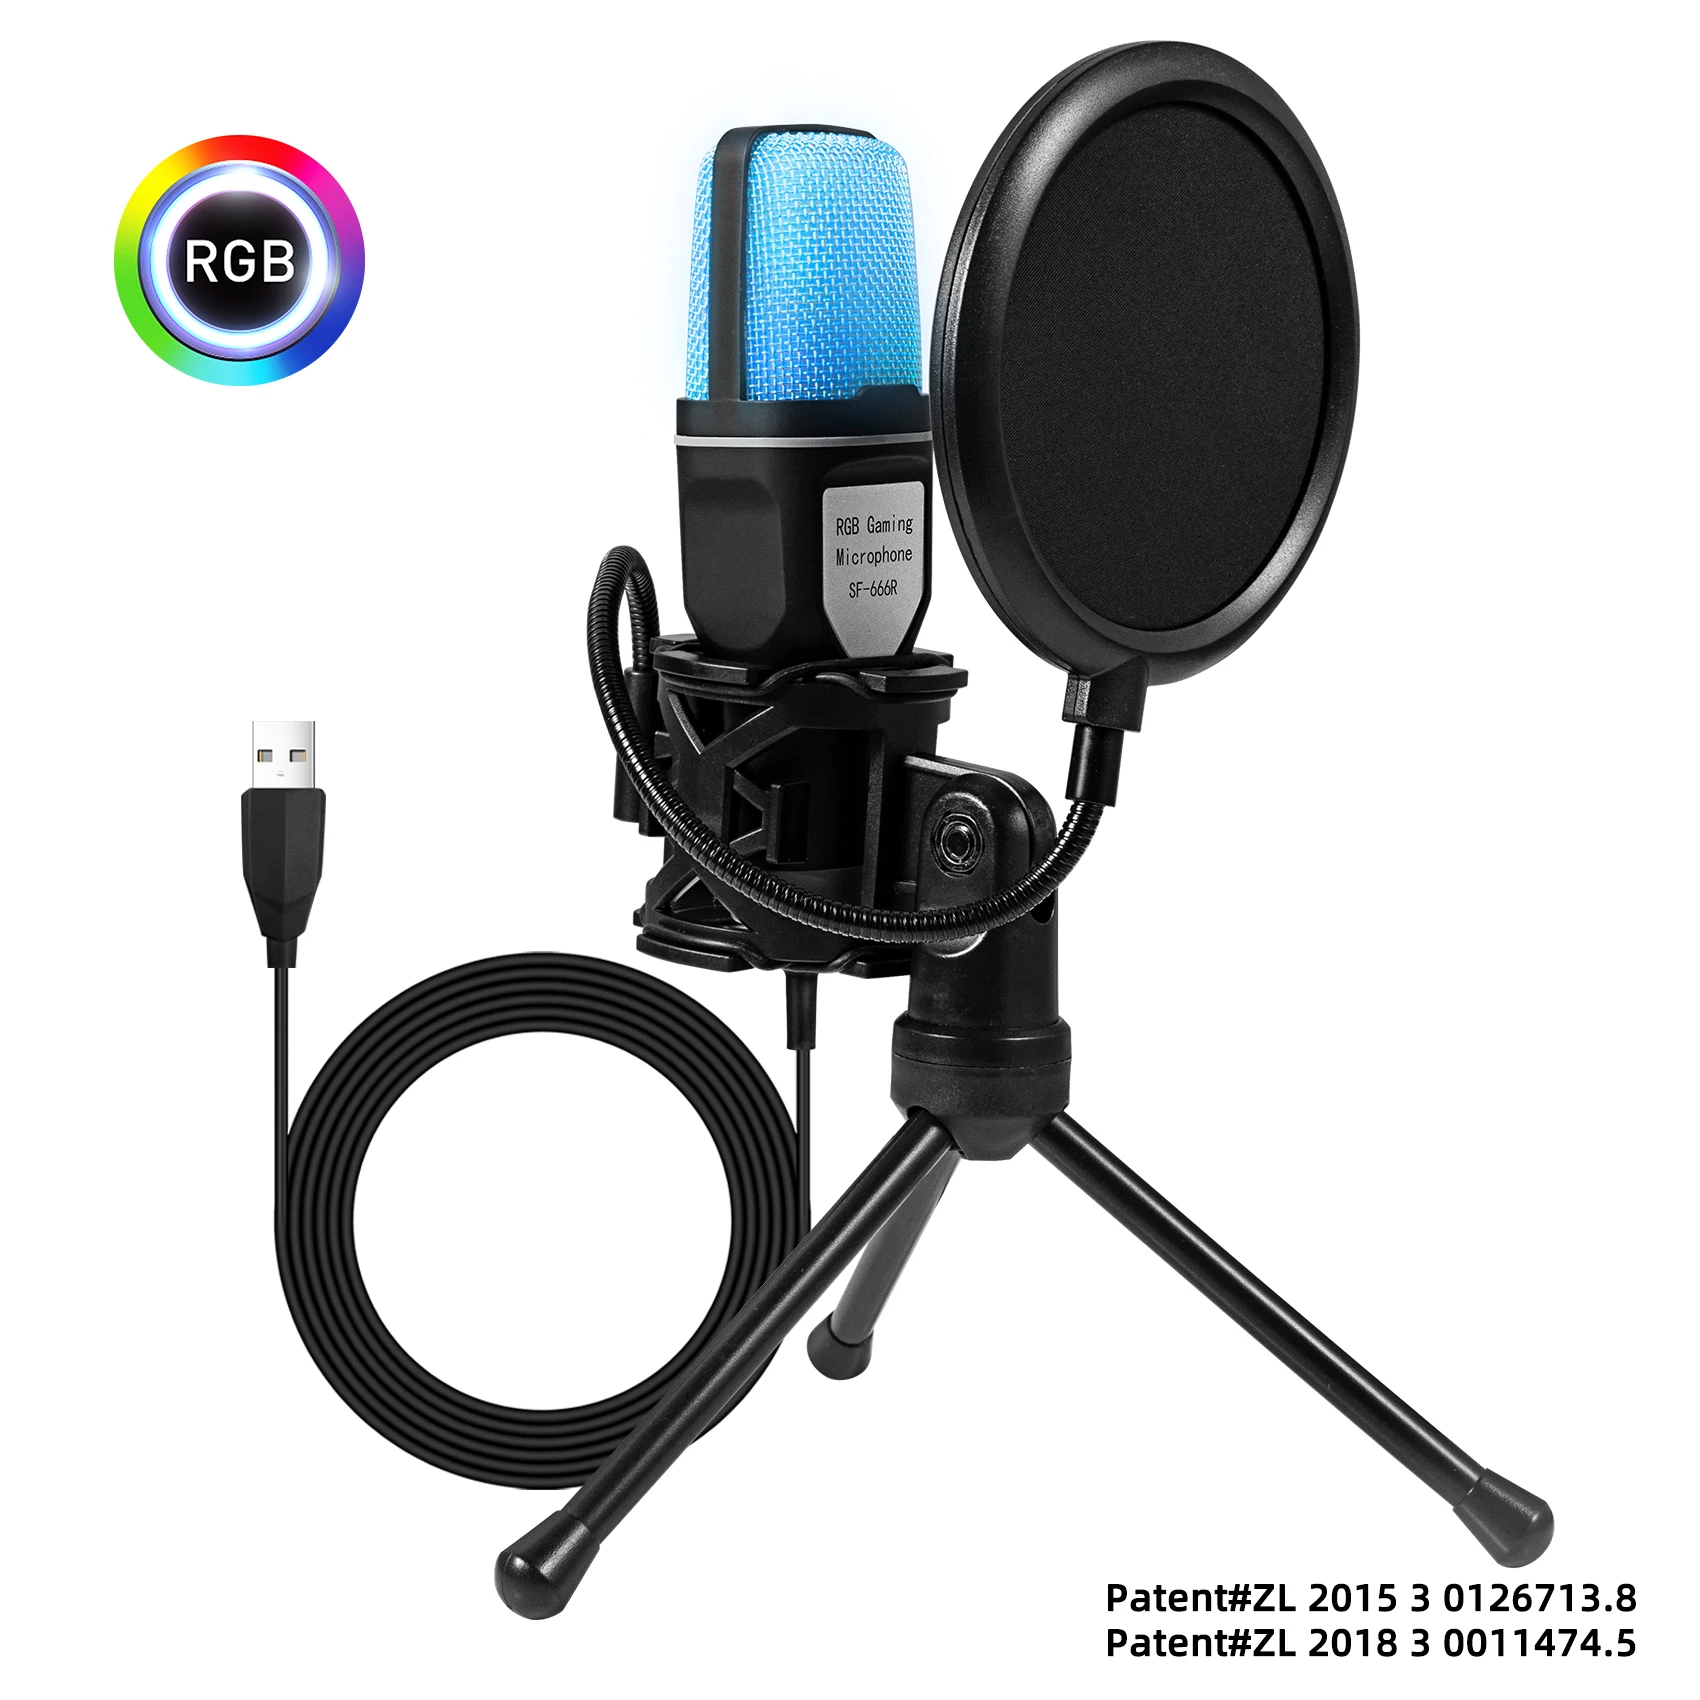 

USB SF-666R Microphone RGB Microfone Condensador Wire Gaming Mic for Podcast Recording Studio Streaming Laptop Desktop PC